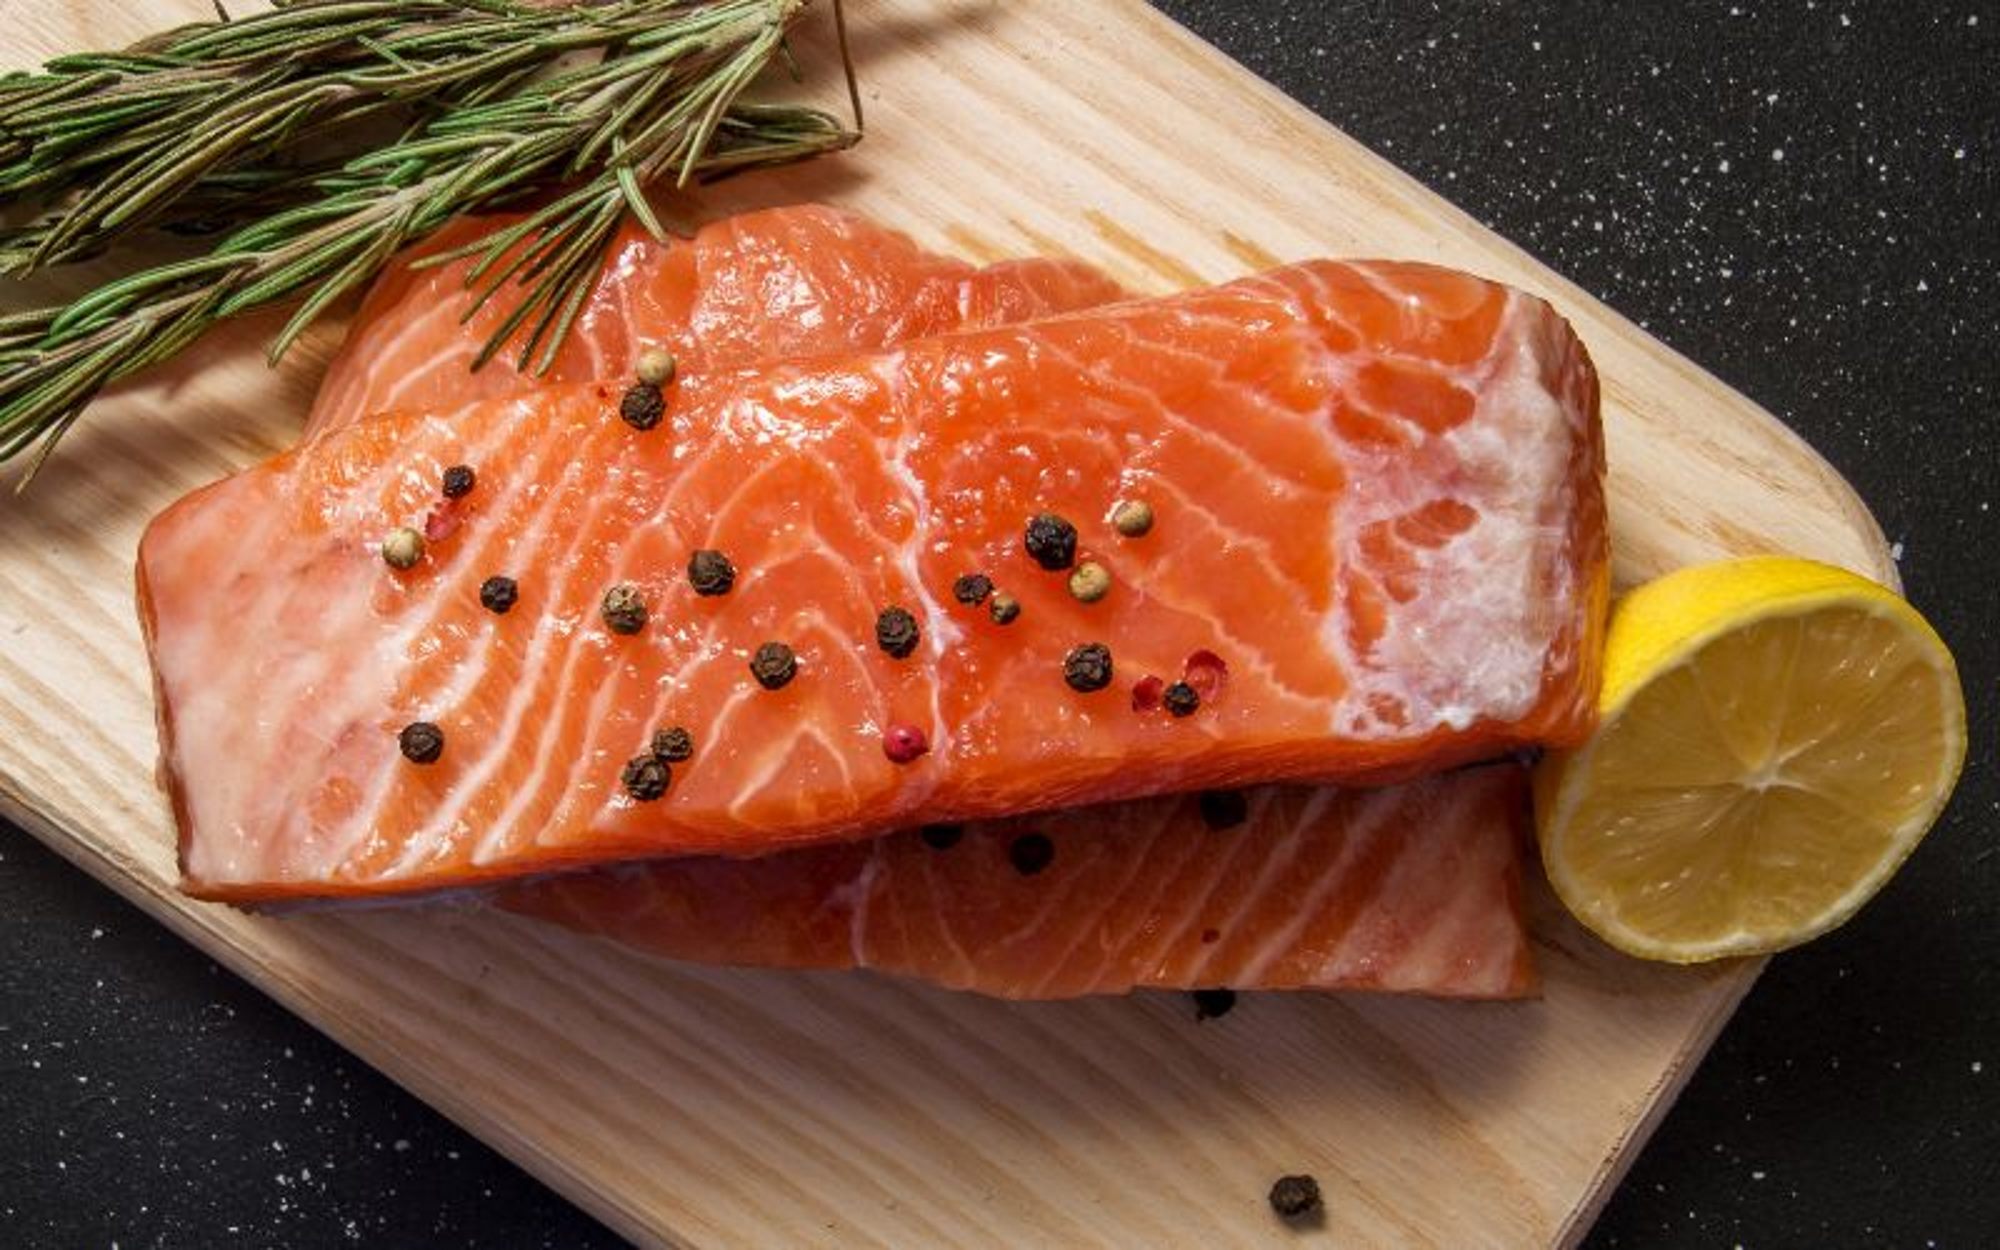 Fish - slices of salmon steaks on a cutting board